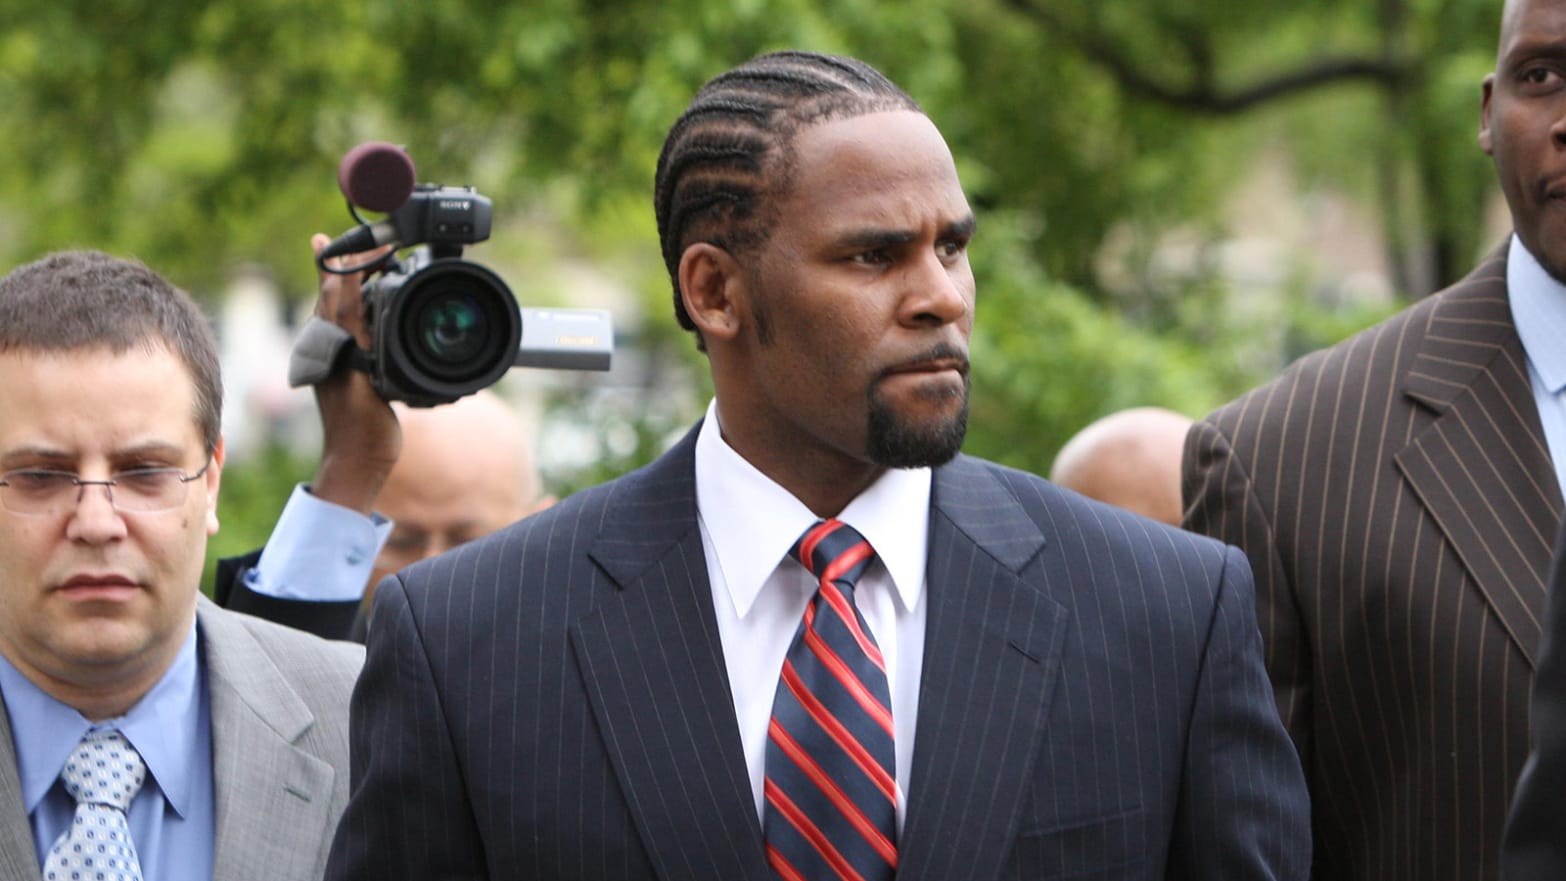 R Kelly Urination Pee Video Teen Speaks Out in Chicago Court